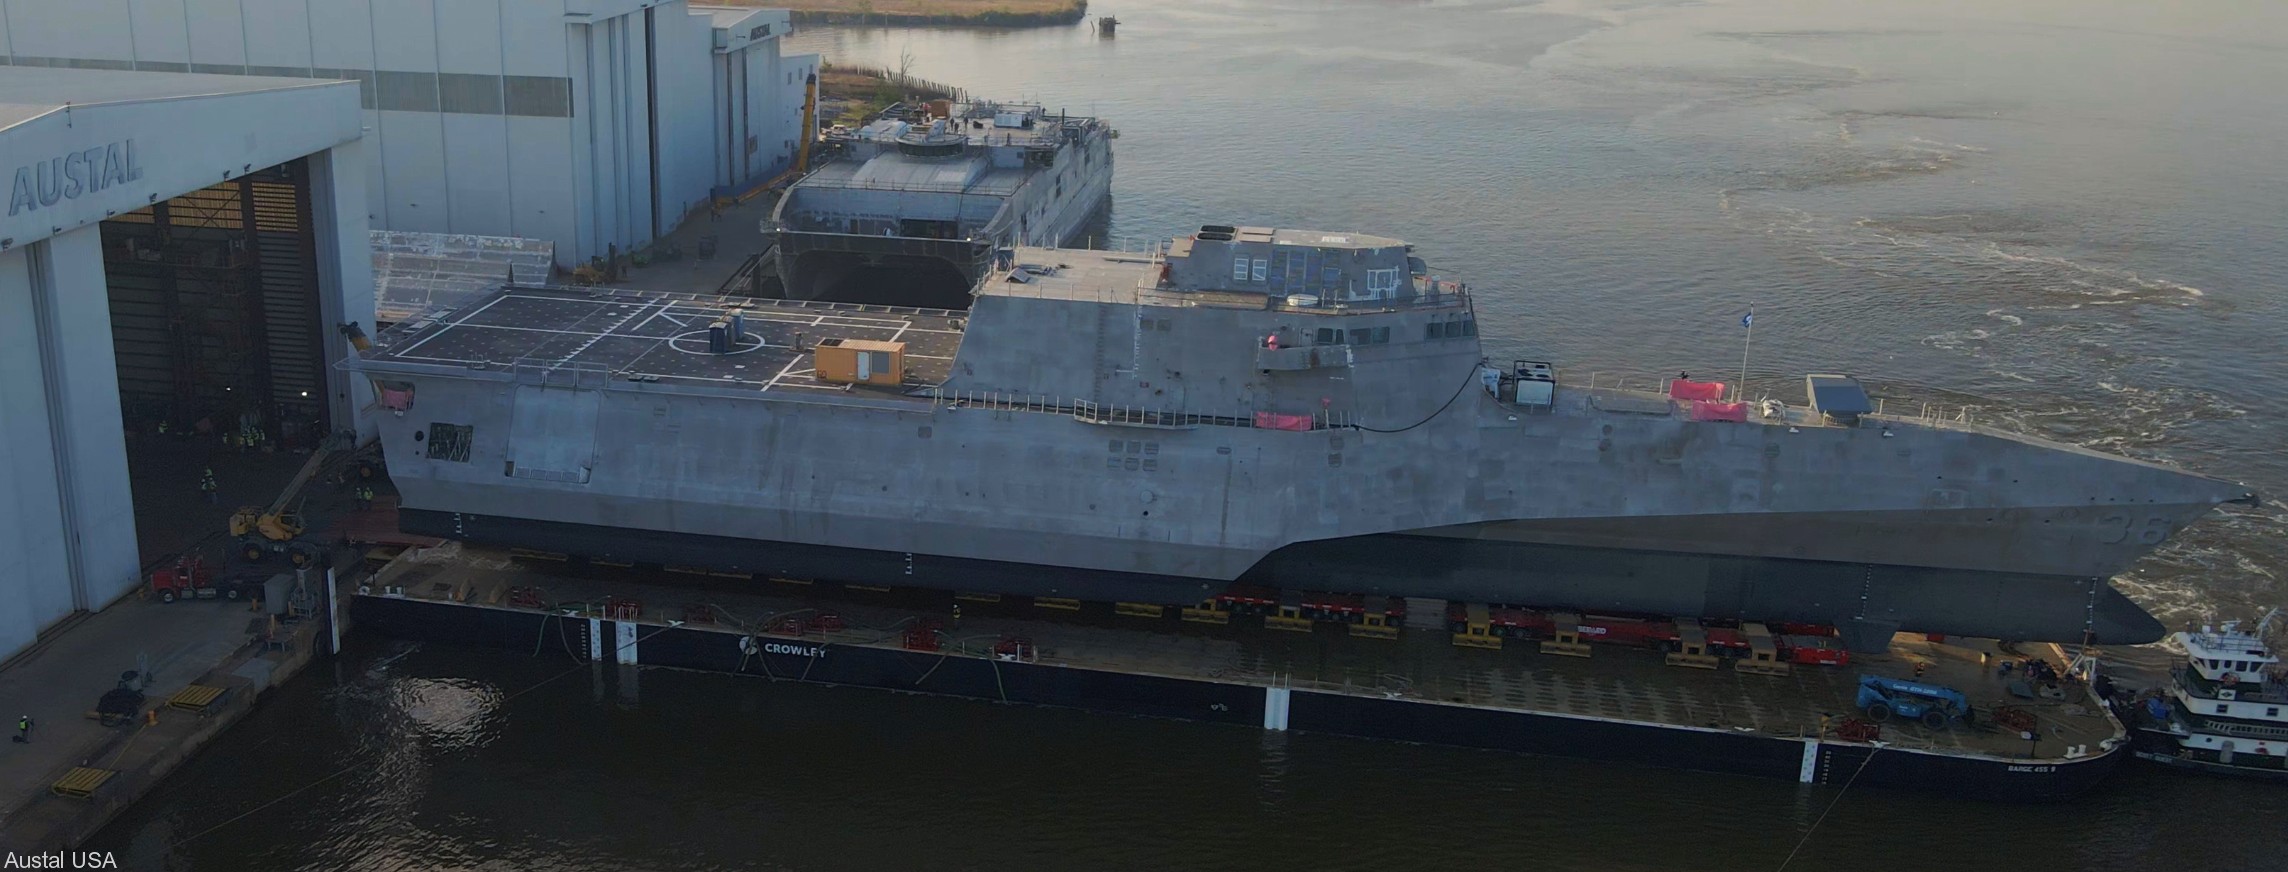 lcs-36 uss kingsville littoral combat ship independence class us navy roll out launching austal mobile alabama 05